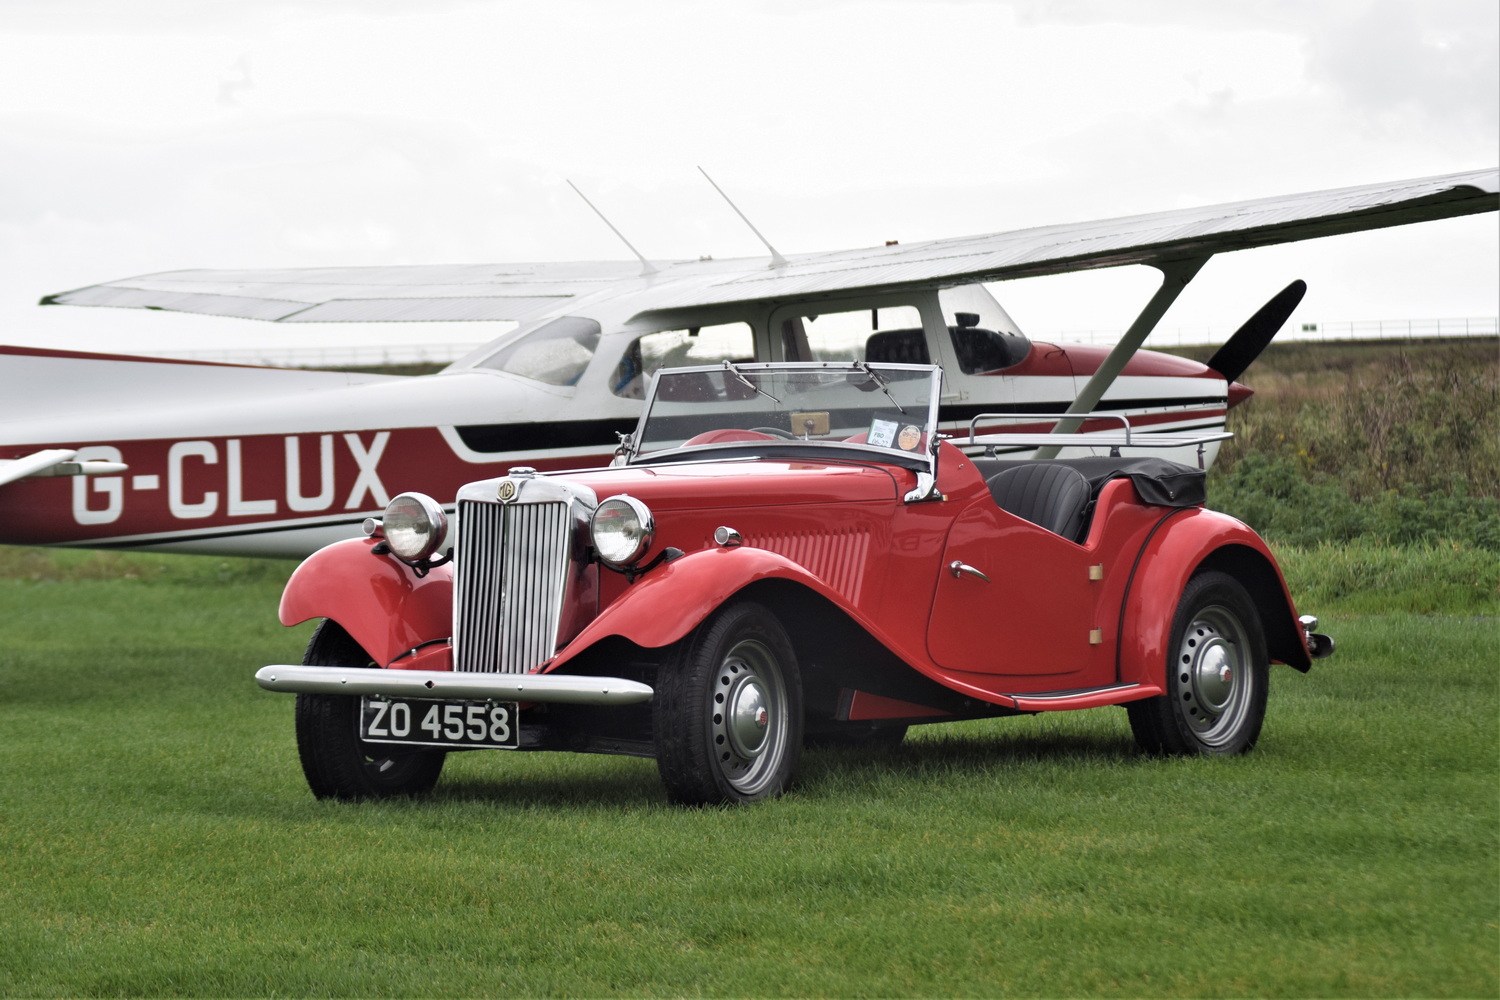 Complete Car Features | Nationwide features rare Irish-built MG